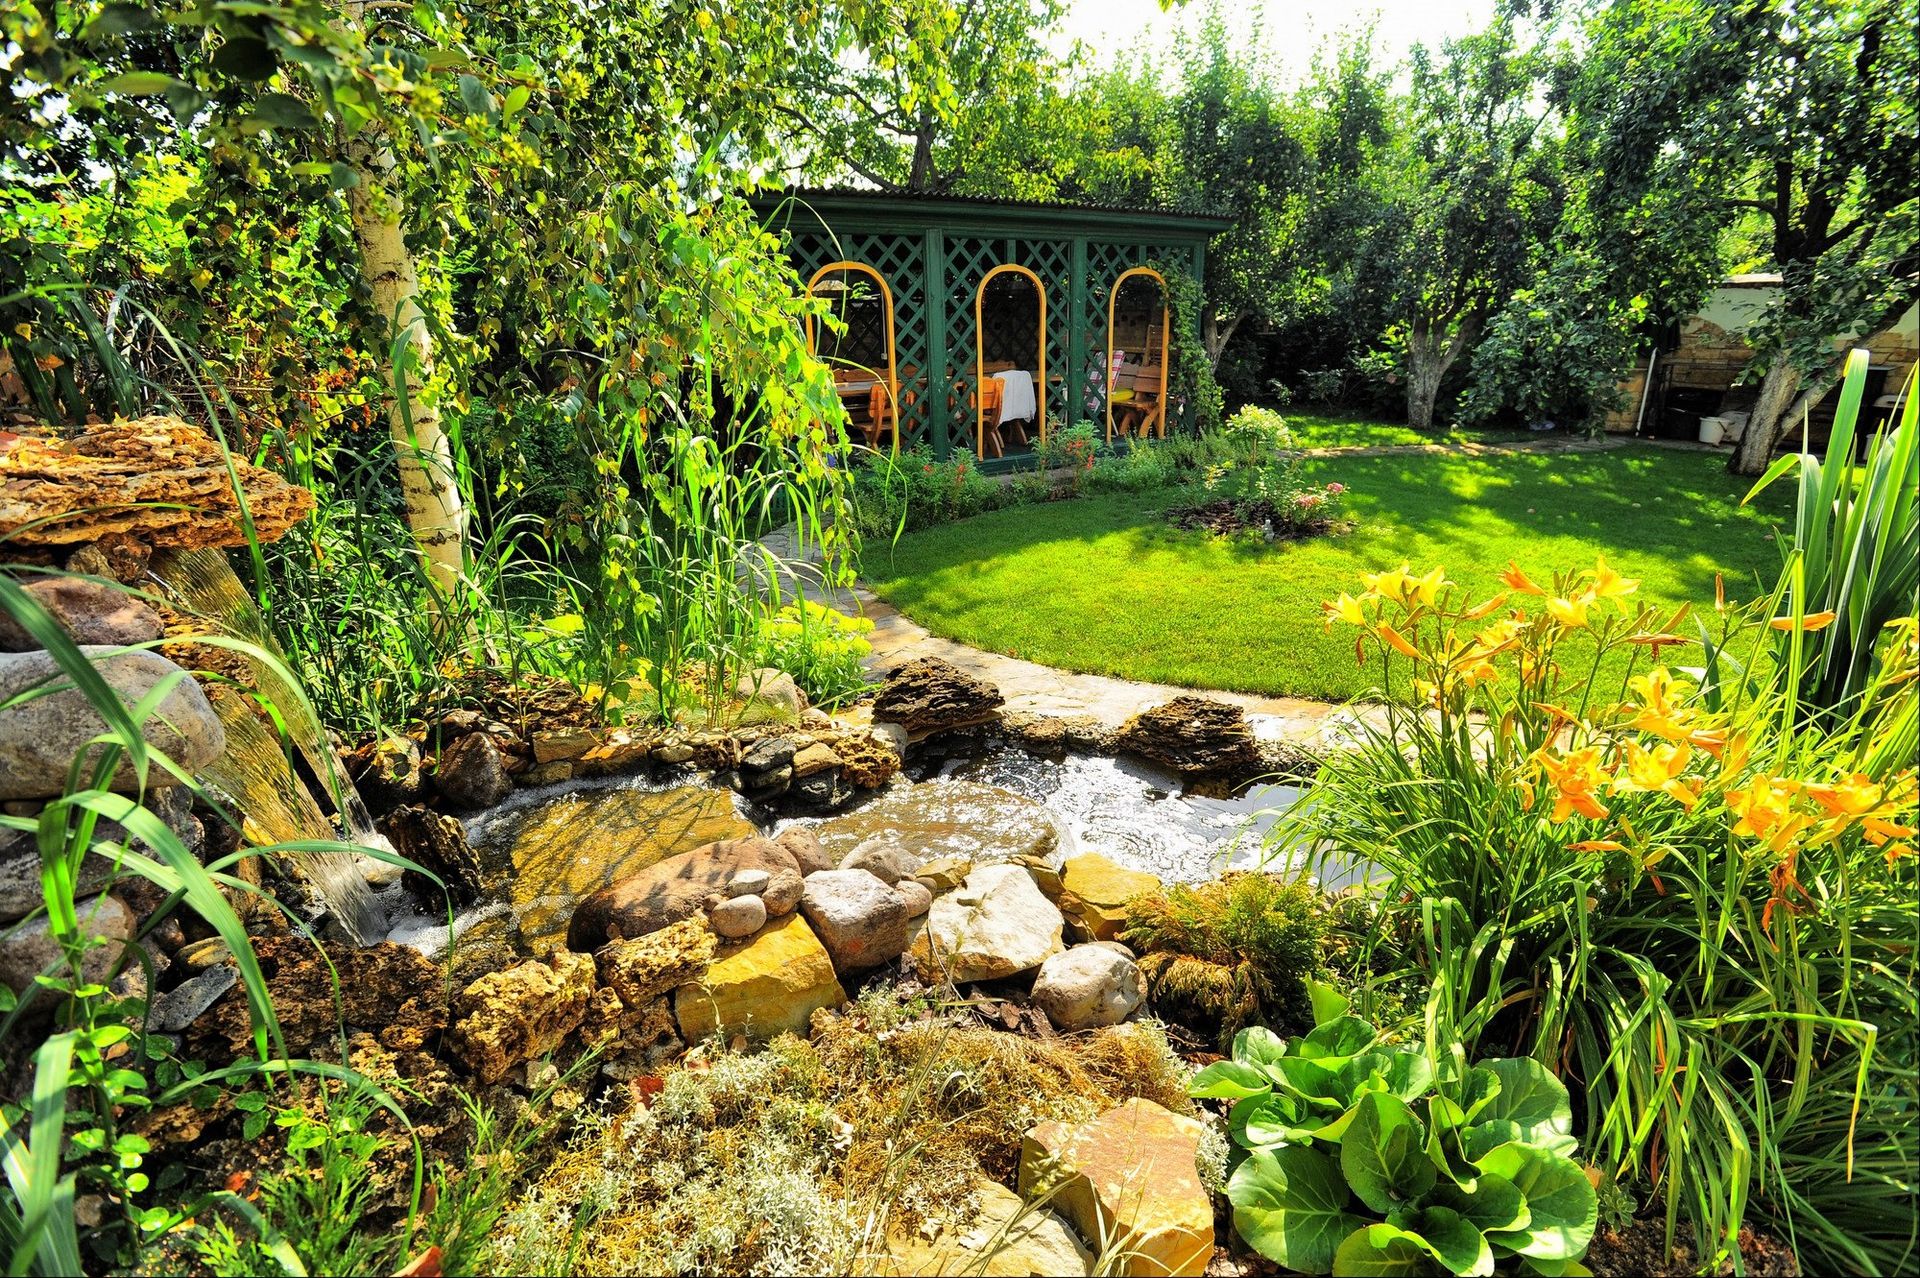 A green garden building seen behind a willow tree in a garden with a rockery and waterfall